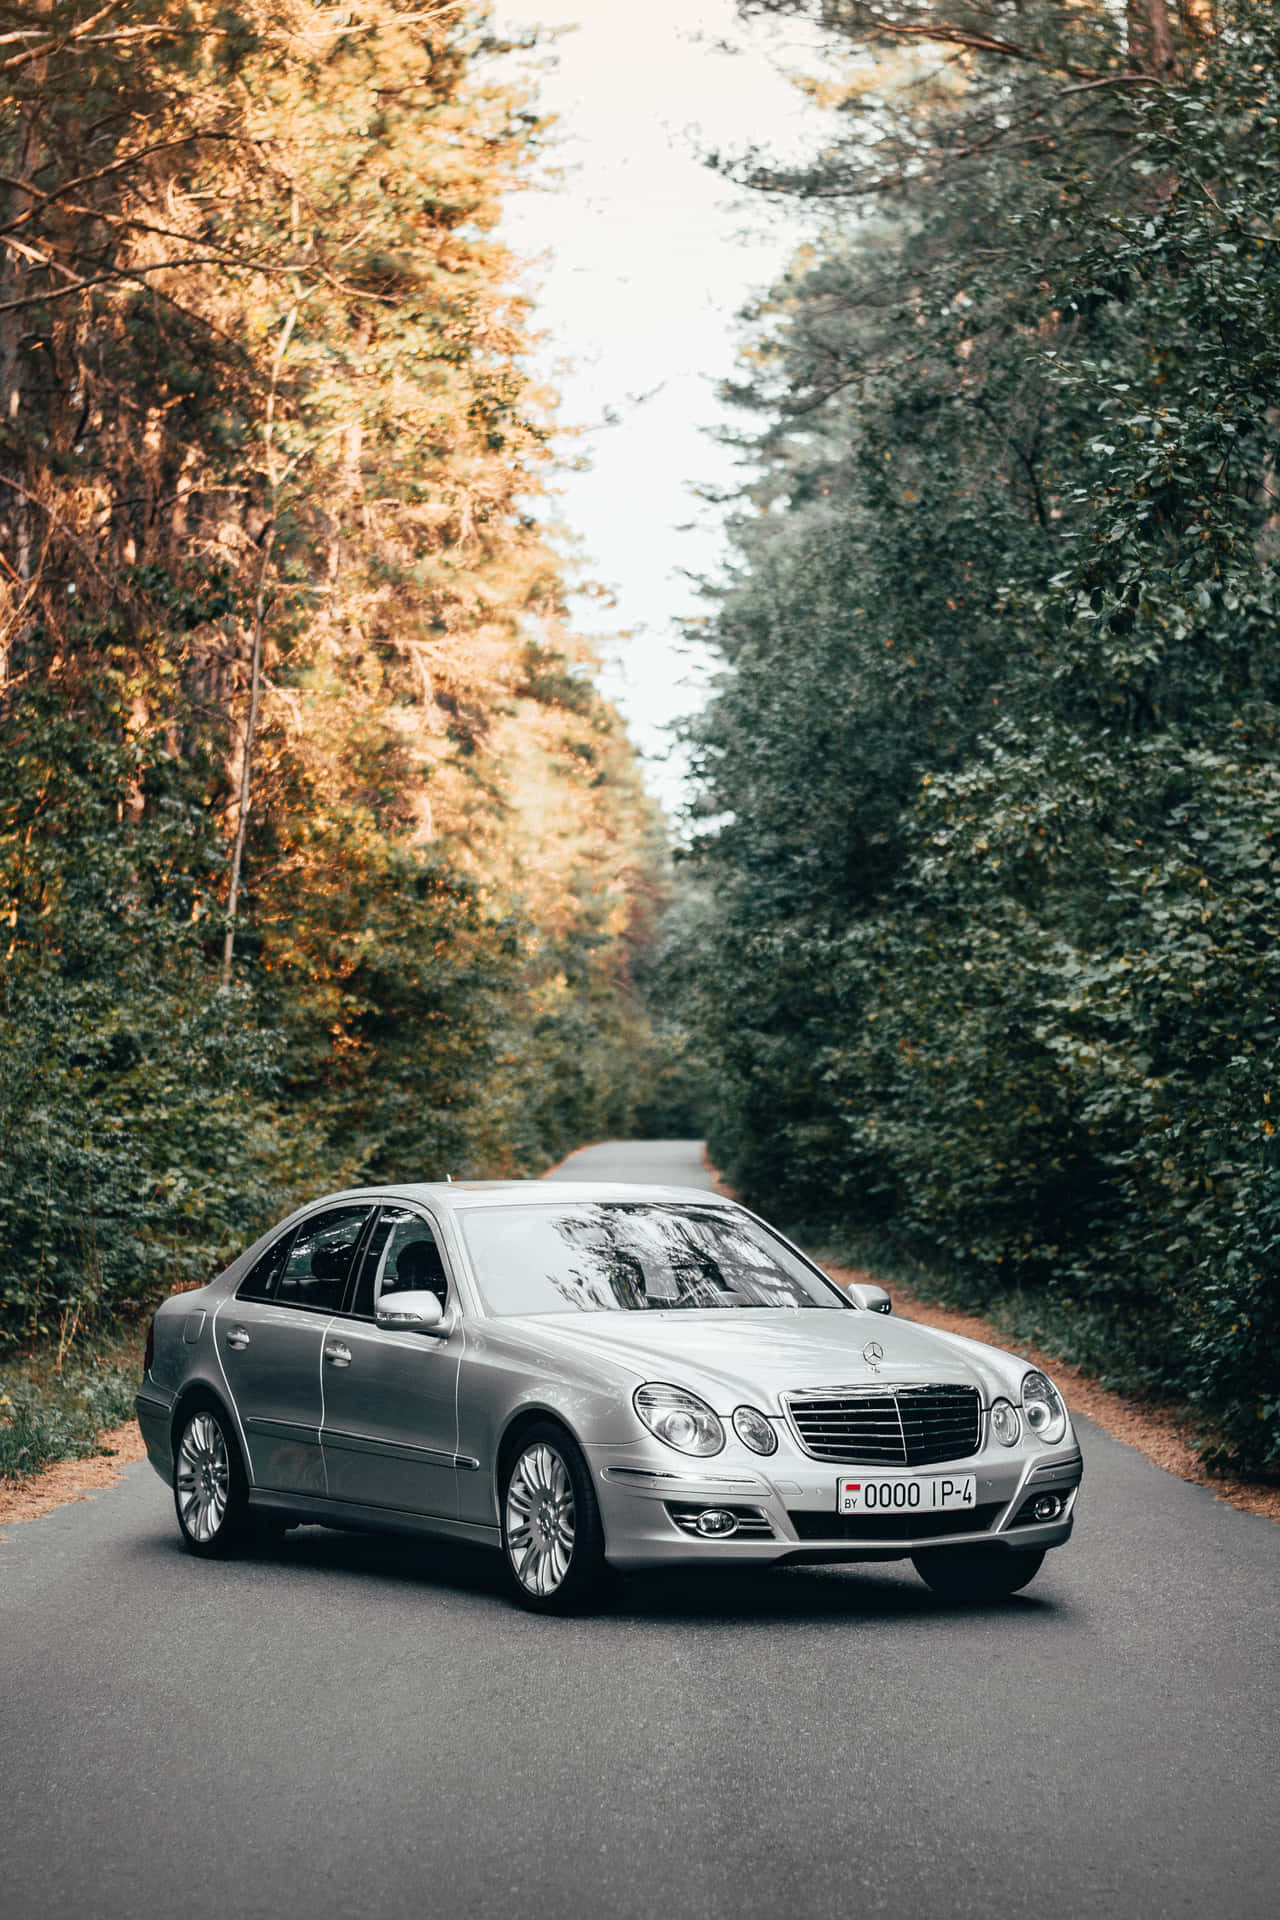 Mercedes Benz Clase E In The Woods Wallpaper